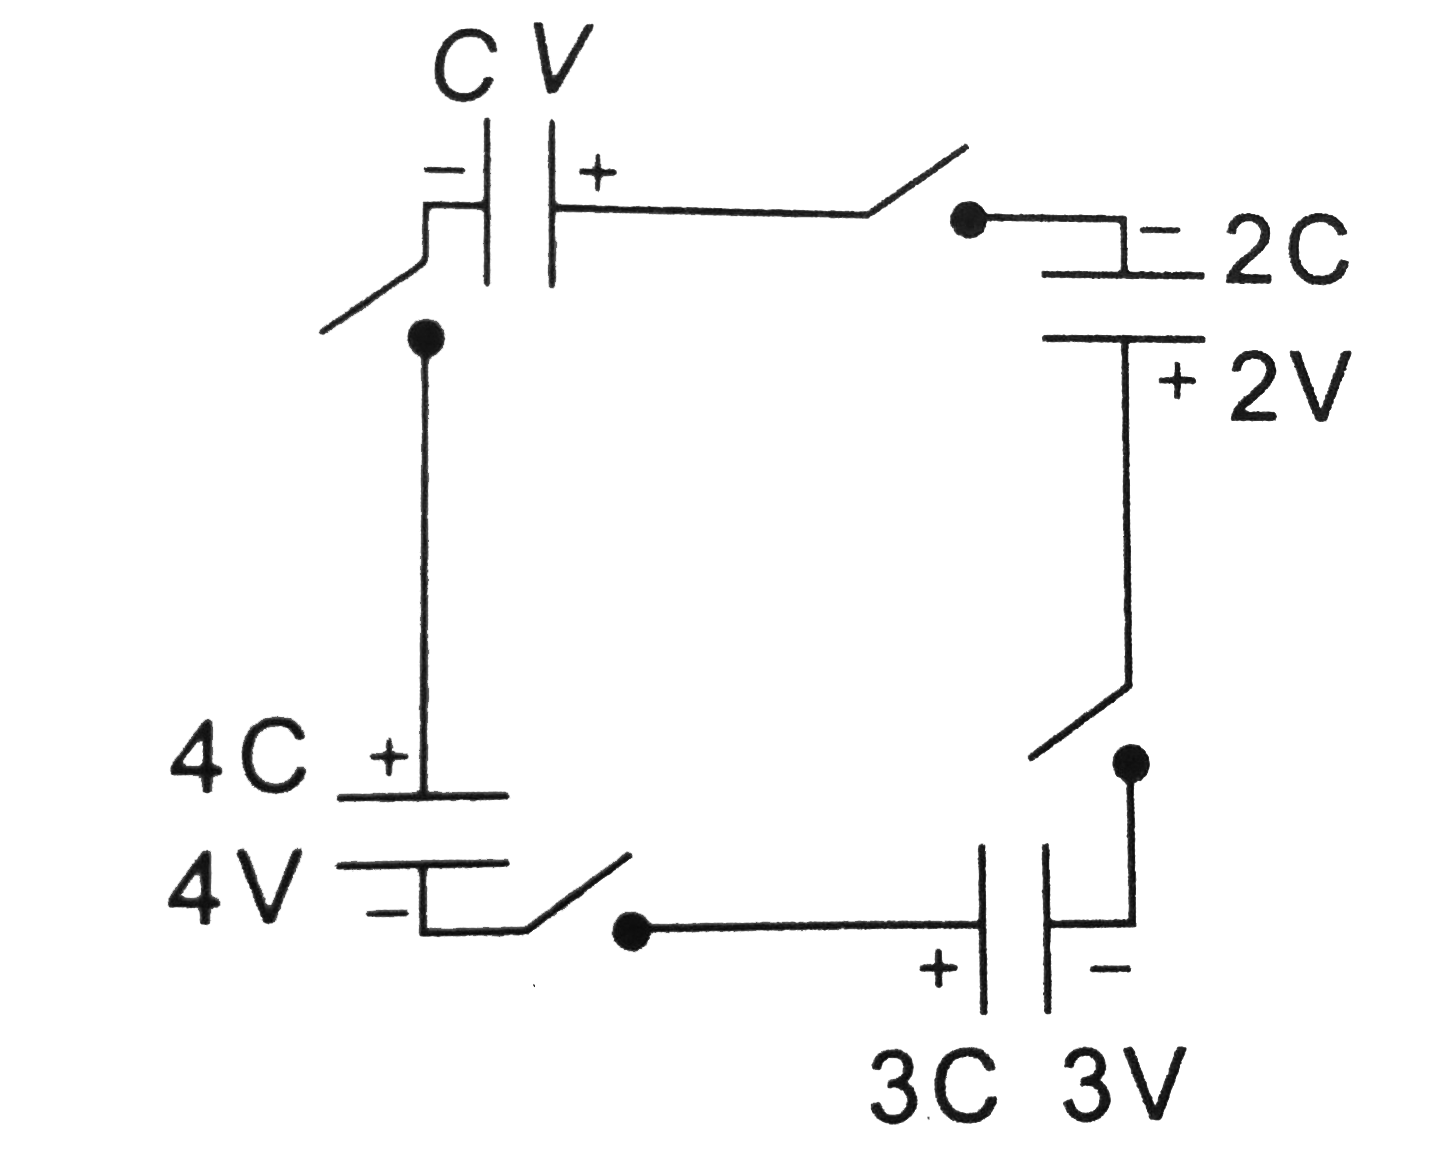 Condensers with capacities C, 2 C, 3C and 4C are charged to the voltage, V, 2 V, 3 V and 4 V correspondingly. The circuit is closed. Find the voltage on all condensers in the equilibrium.